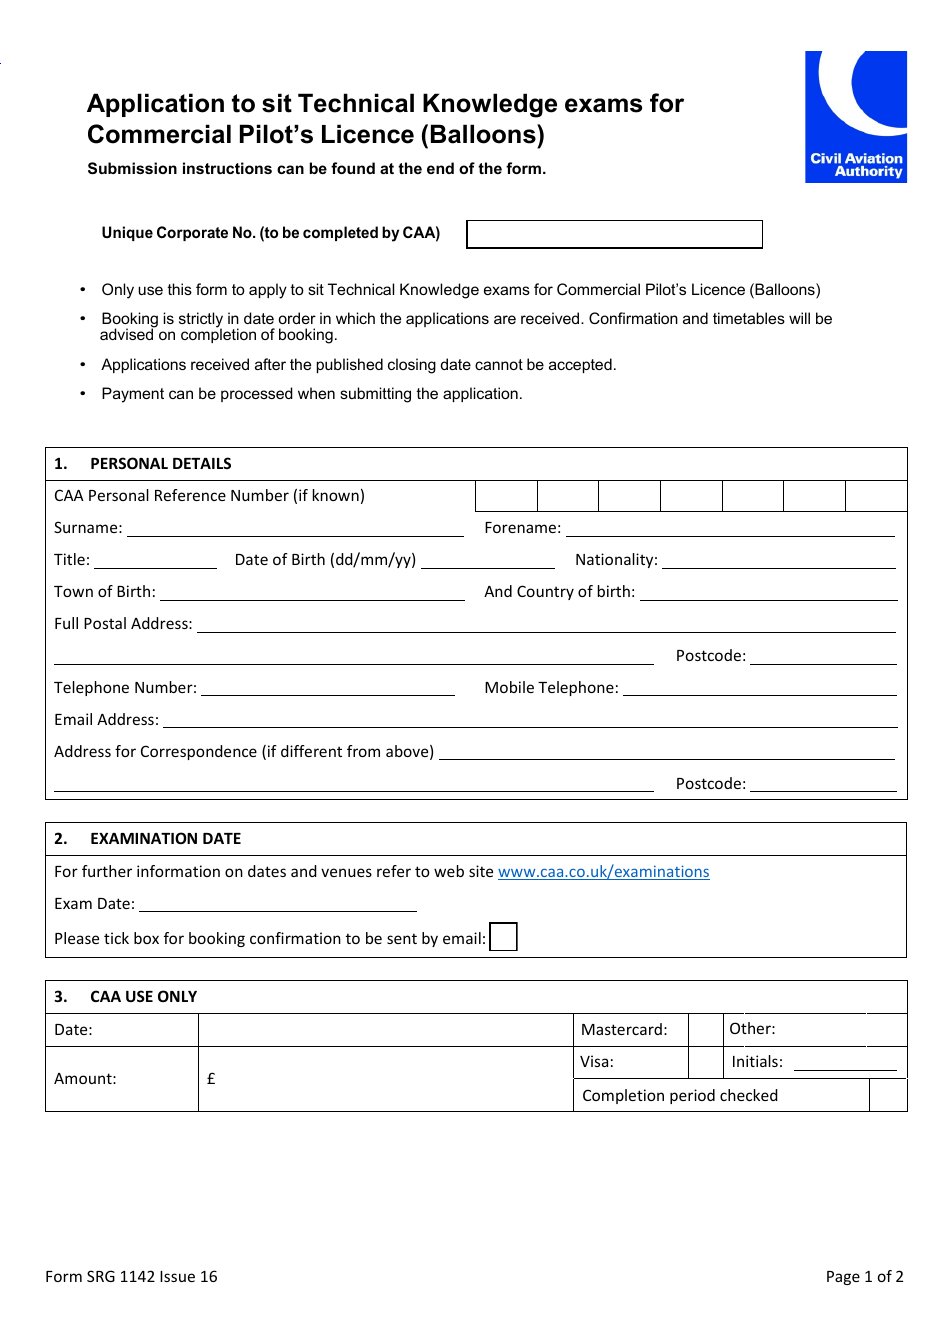 Form SRG1142 Application to Sit Technical Knowledge Exams for Commercial Pilots Licence (Balloons) - United Kingdom, Page 1